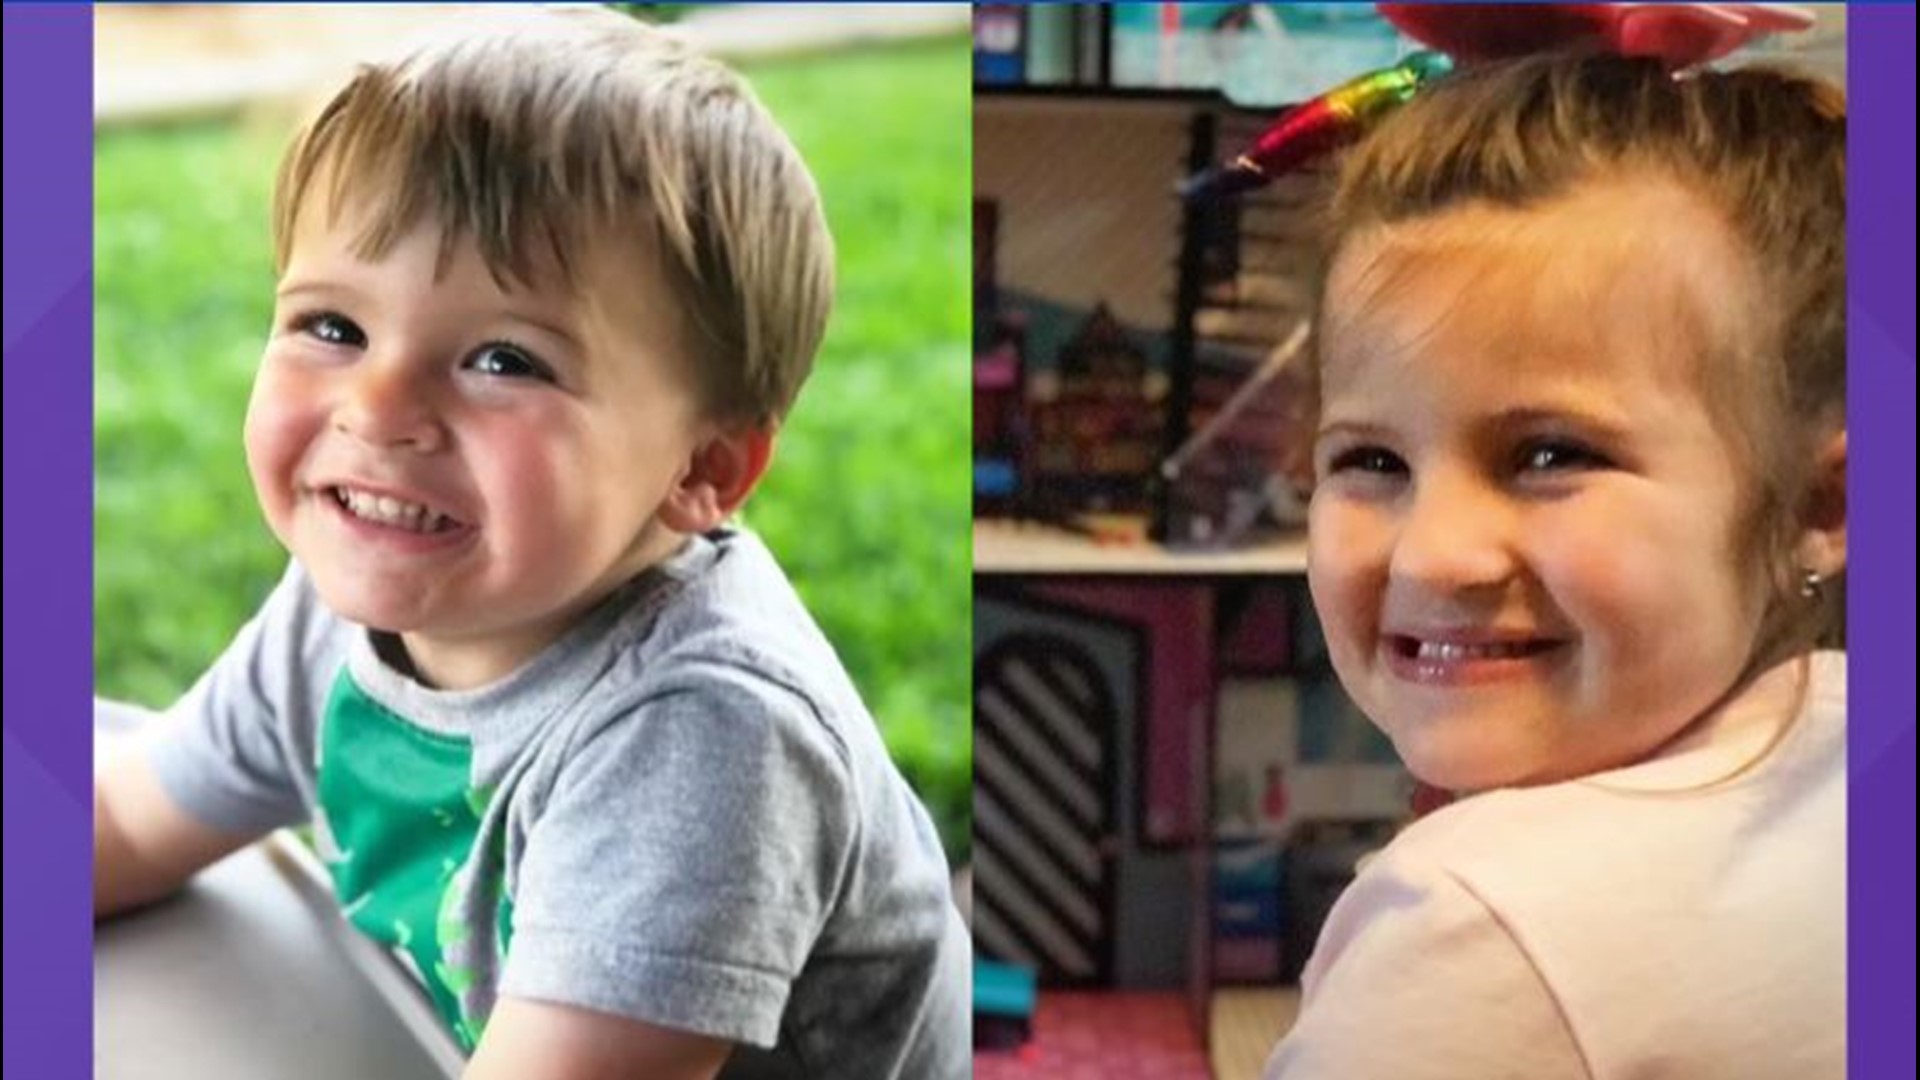 The foundation created in honor of the two Louisville children killed in a Panama City crash seeks to help first responders and kids in our communities.